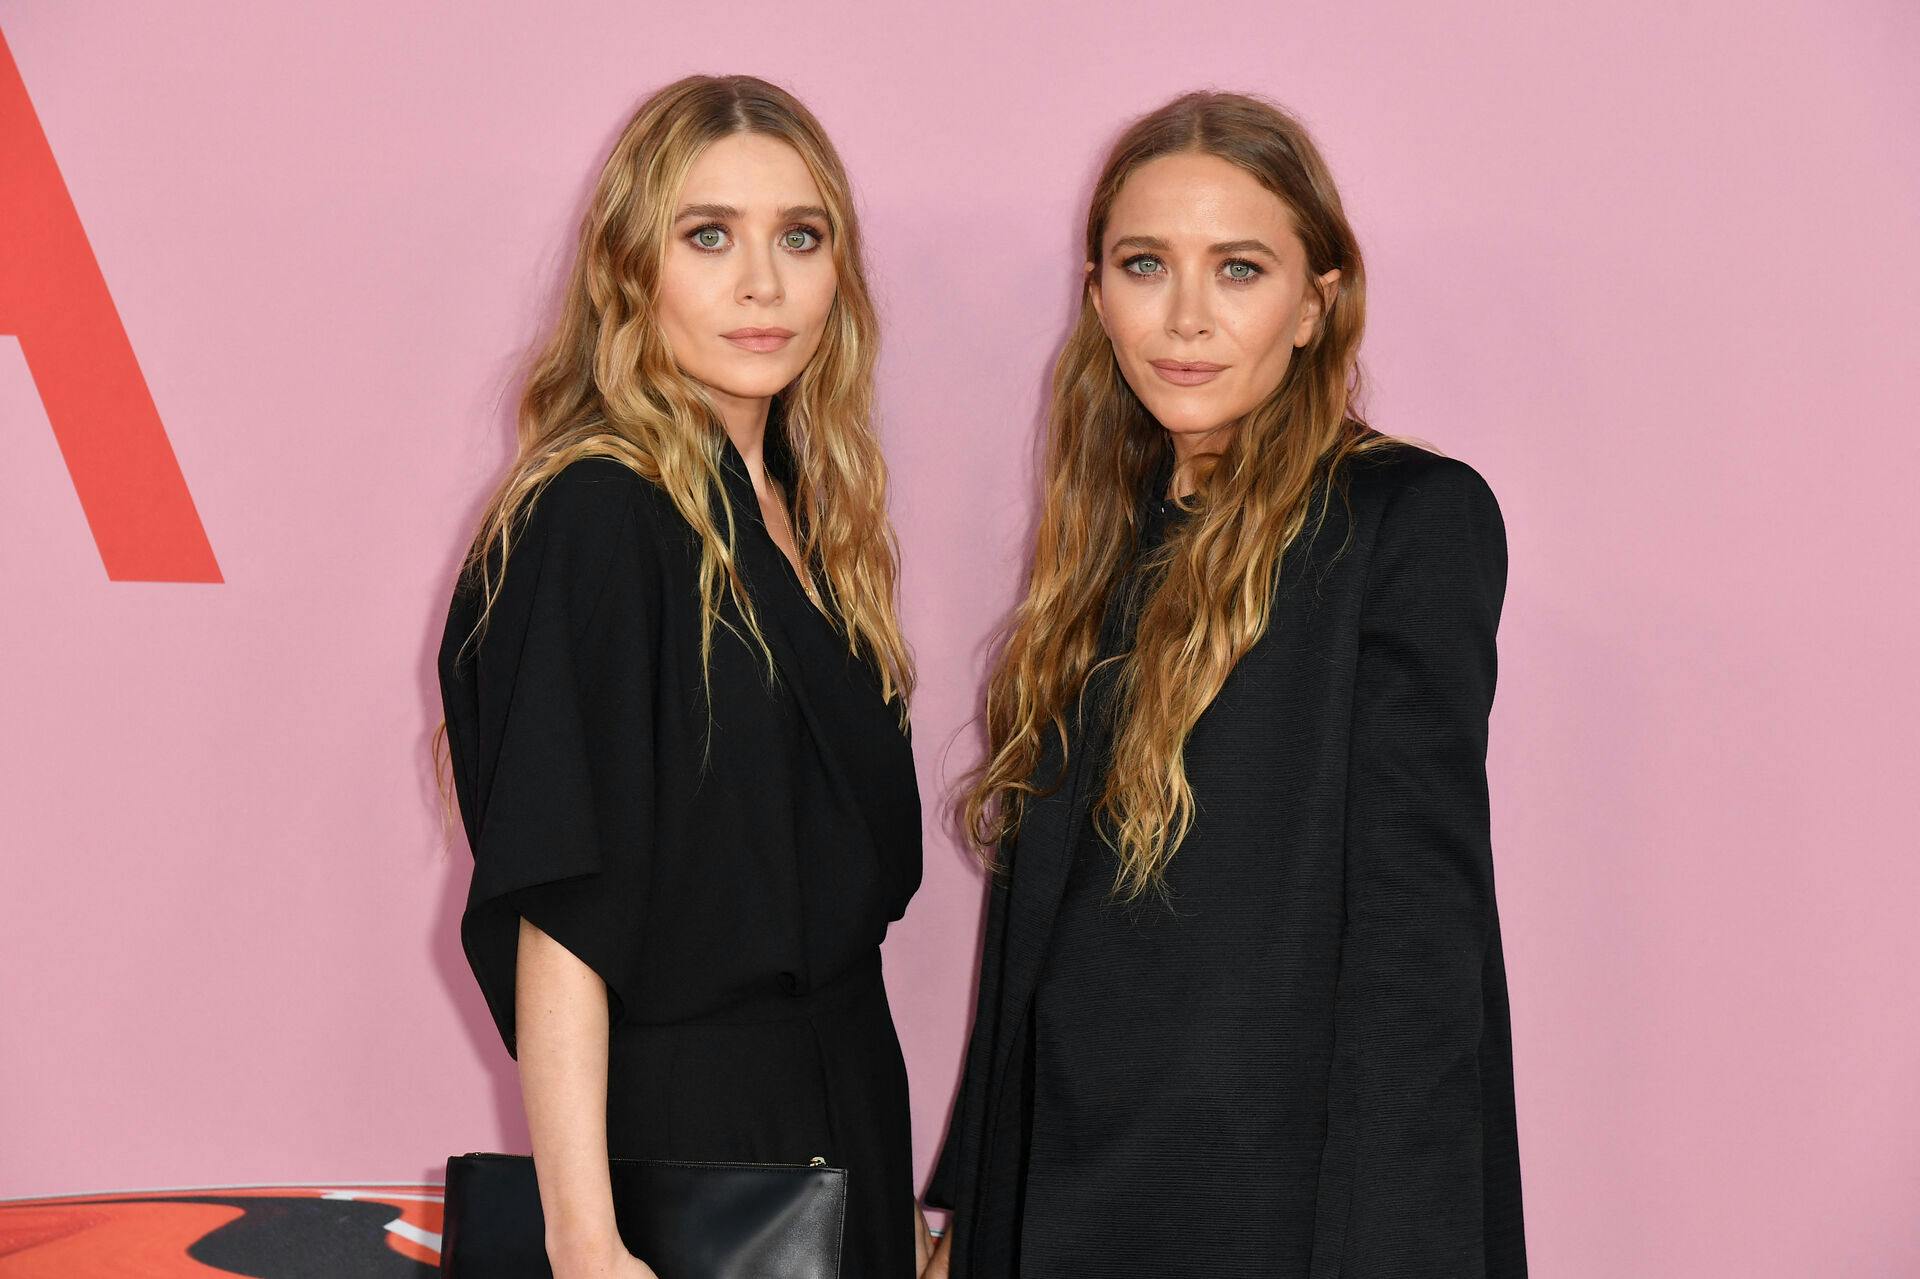 US fashion designers Mary-Kate (R) and Ashley Olsen arrive for the 2019 CFDA fashion awards at the Brooklyn Museum in New York City on June 3, 2019.  ANGELA WEISS / AFP